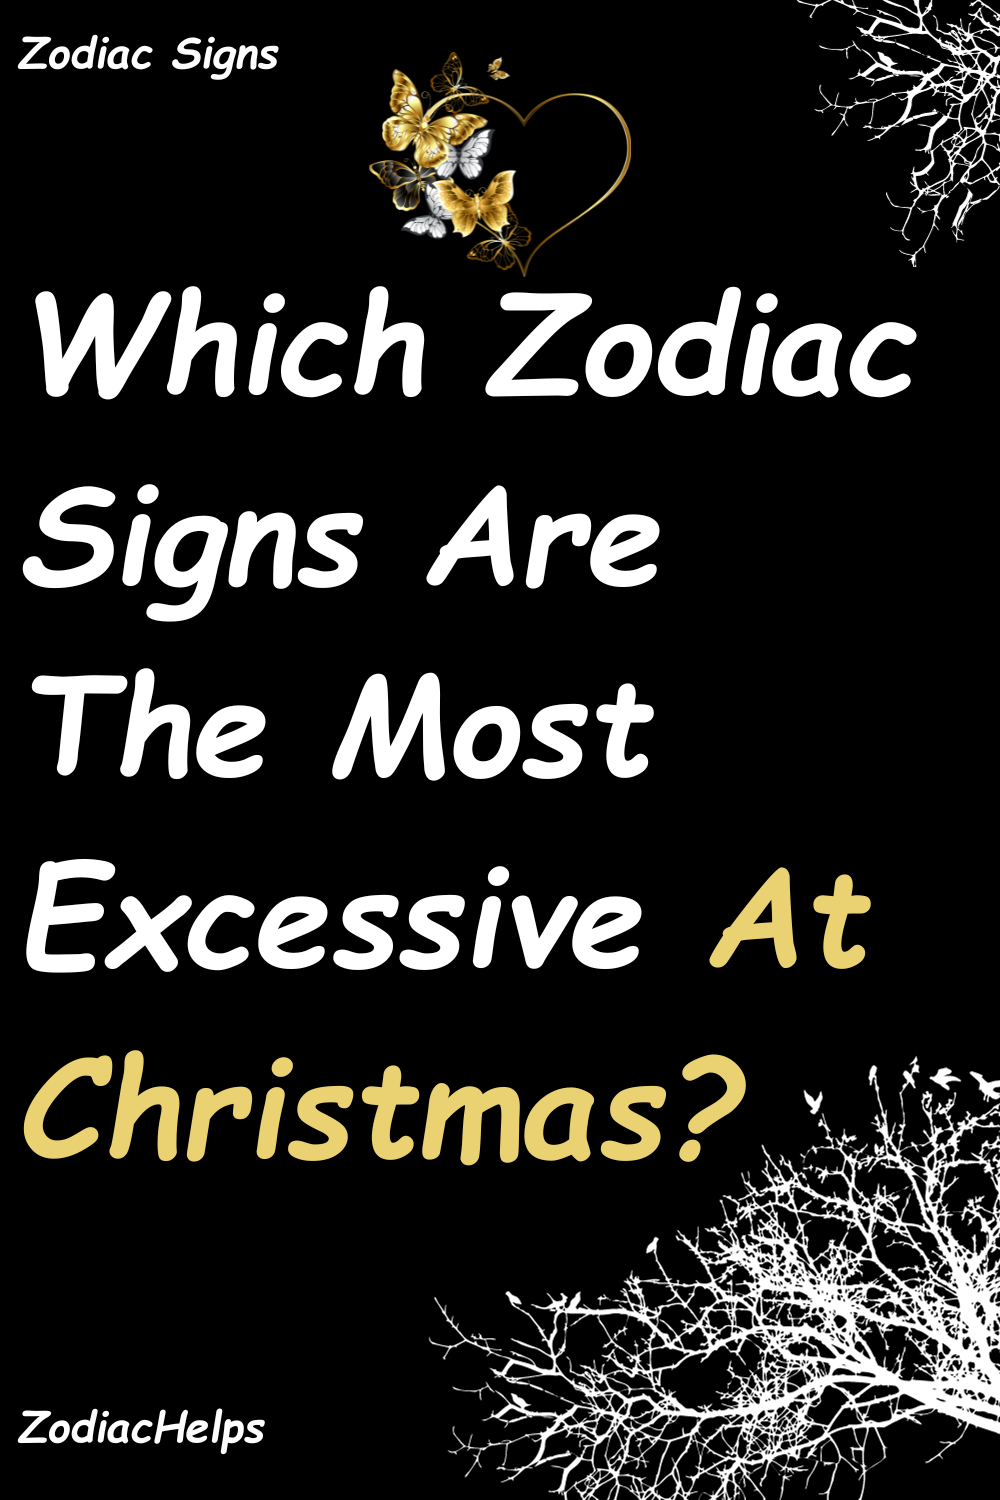 Which Zodiac Signs Are The Most Excessive At Christmas?